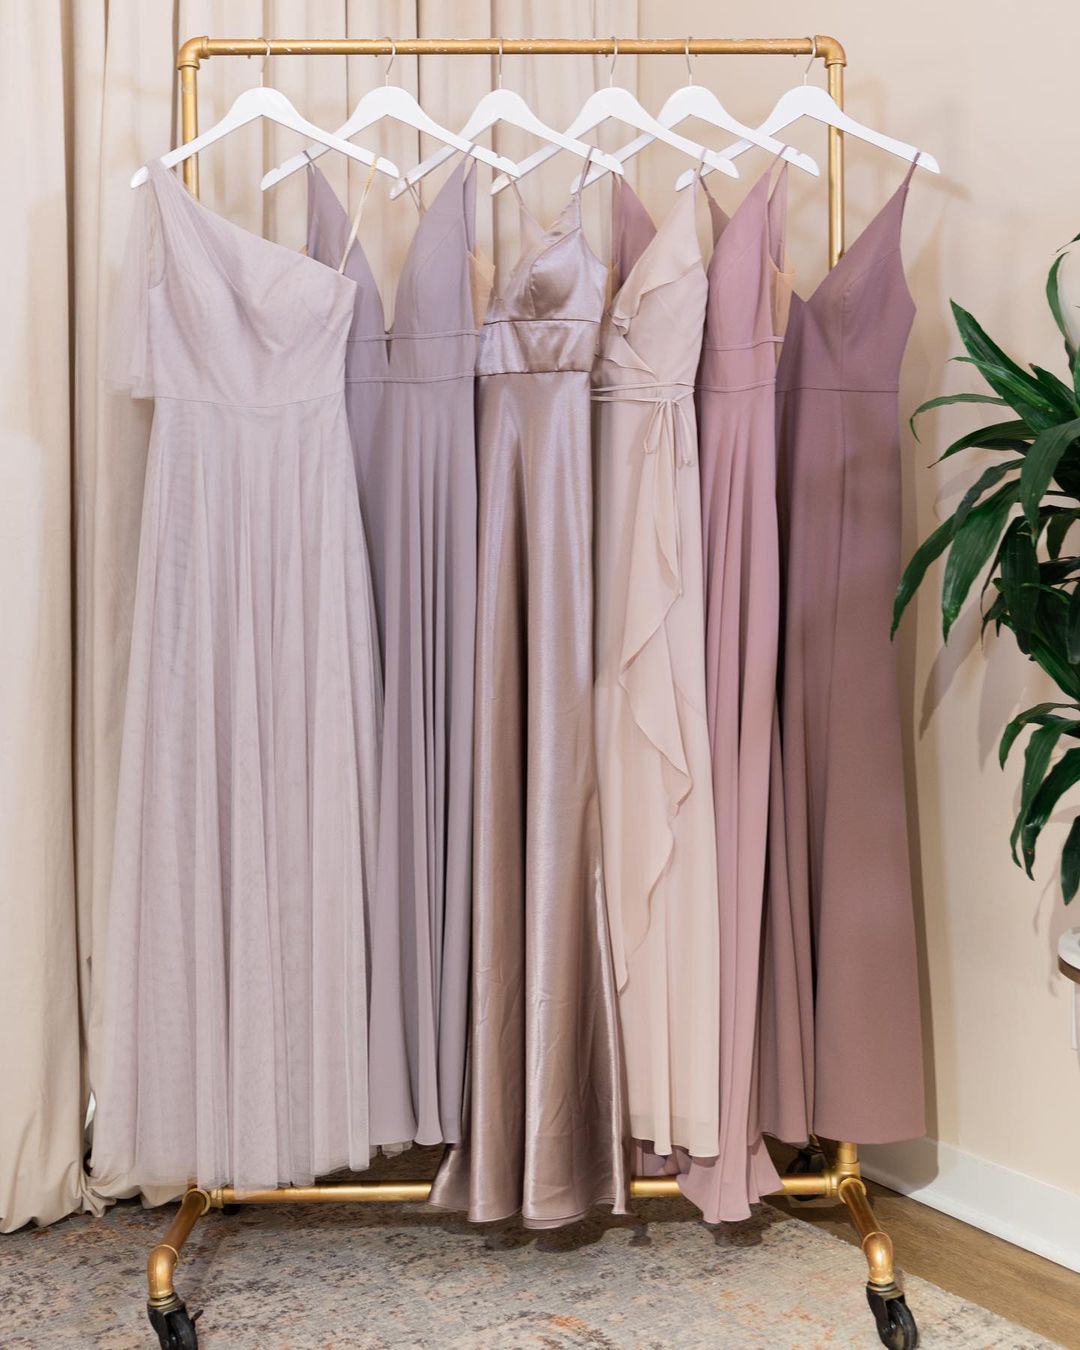 lavender wedding colors guests outfits ideas